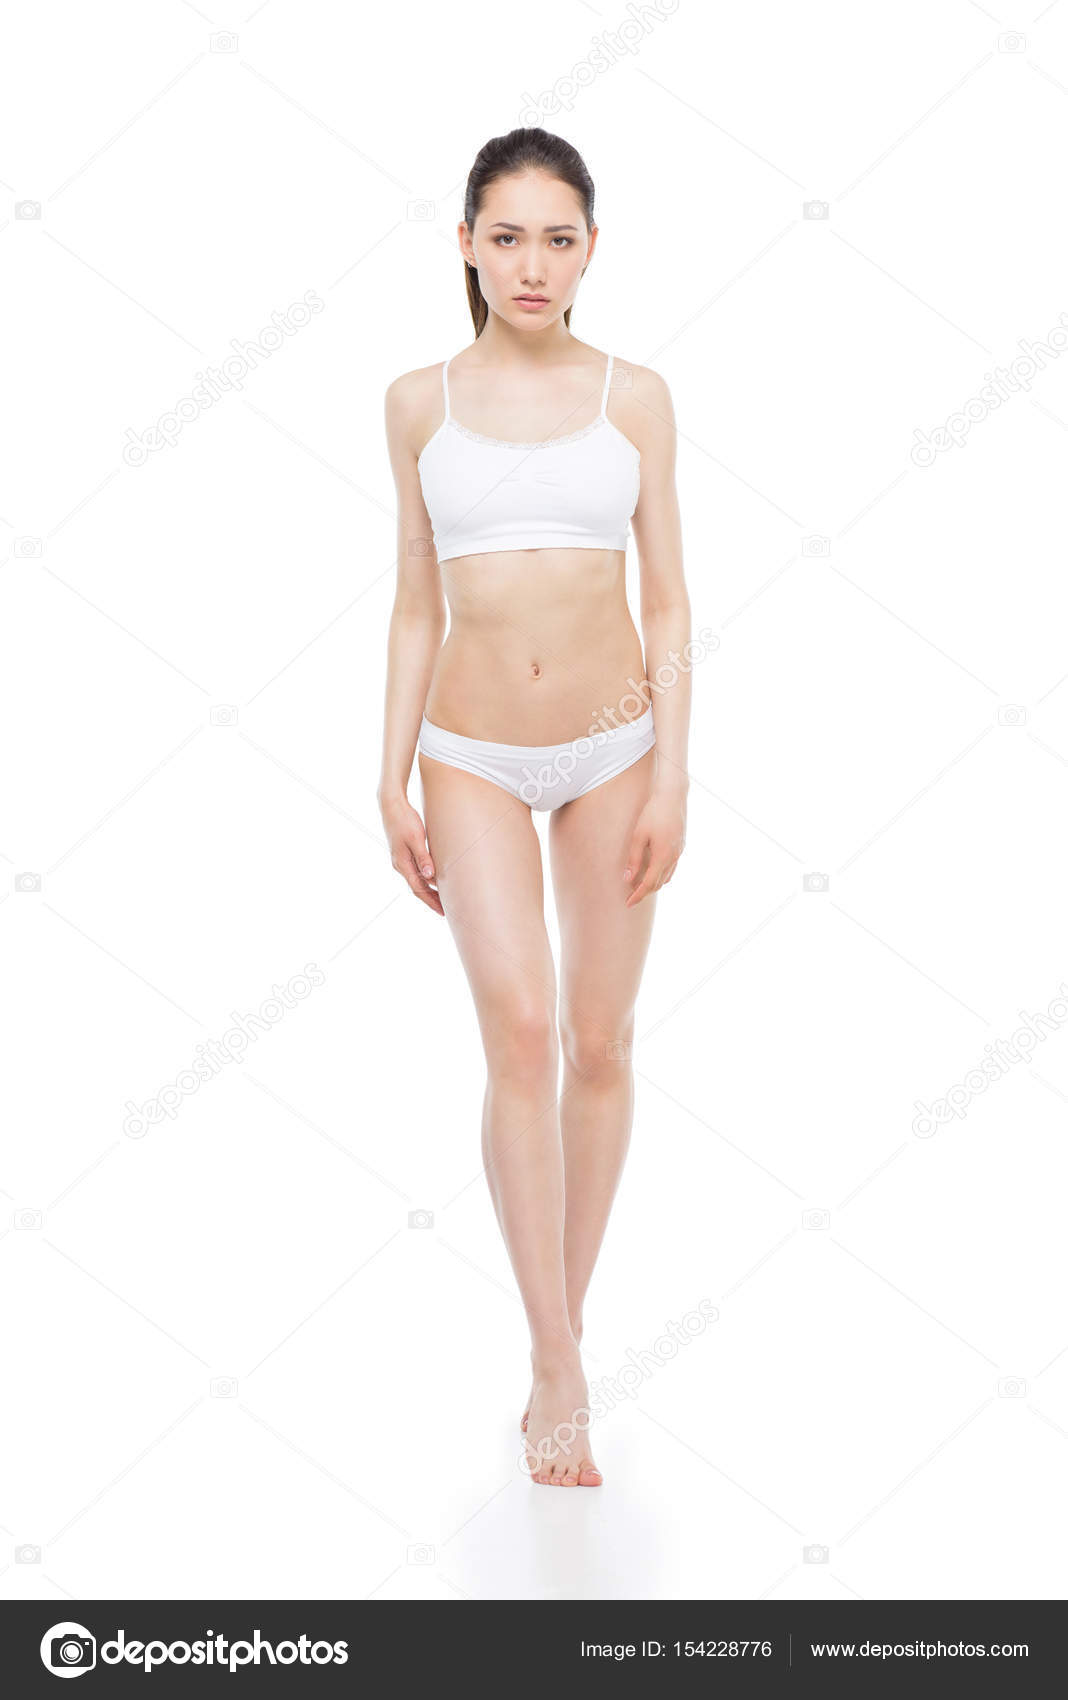 Cropped shot of seductive young woman posing in white underwear